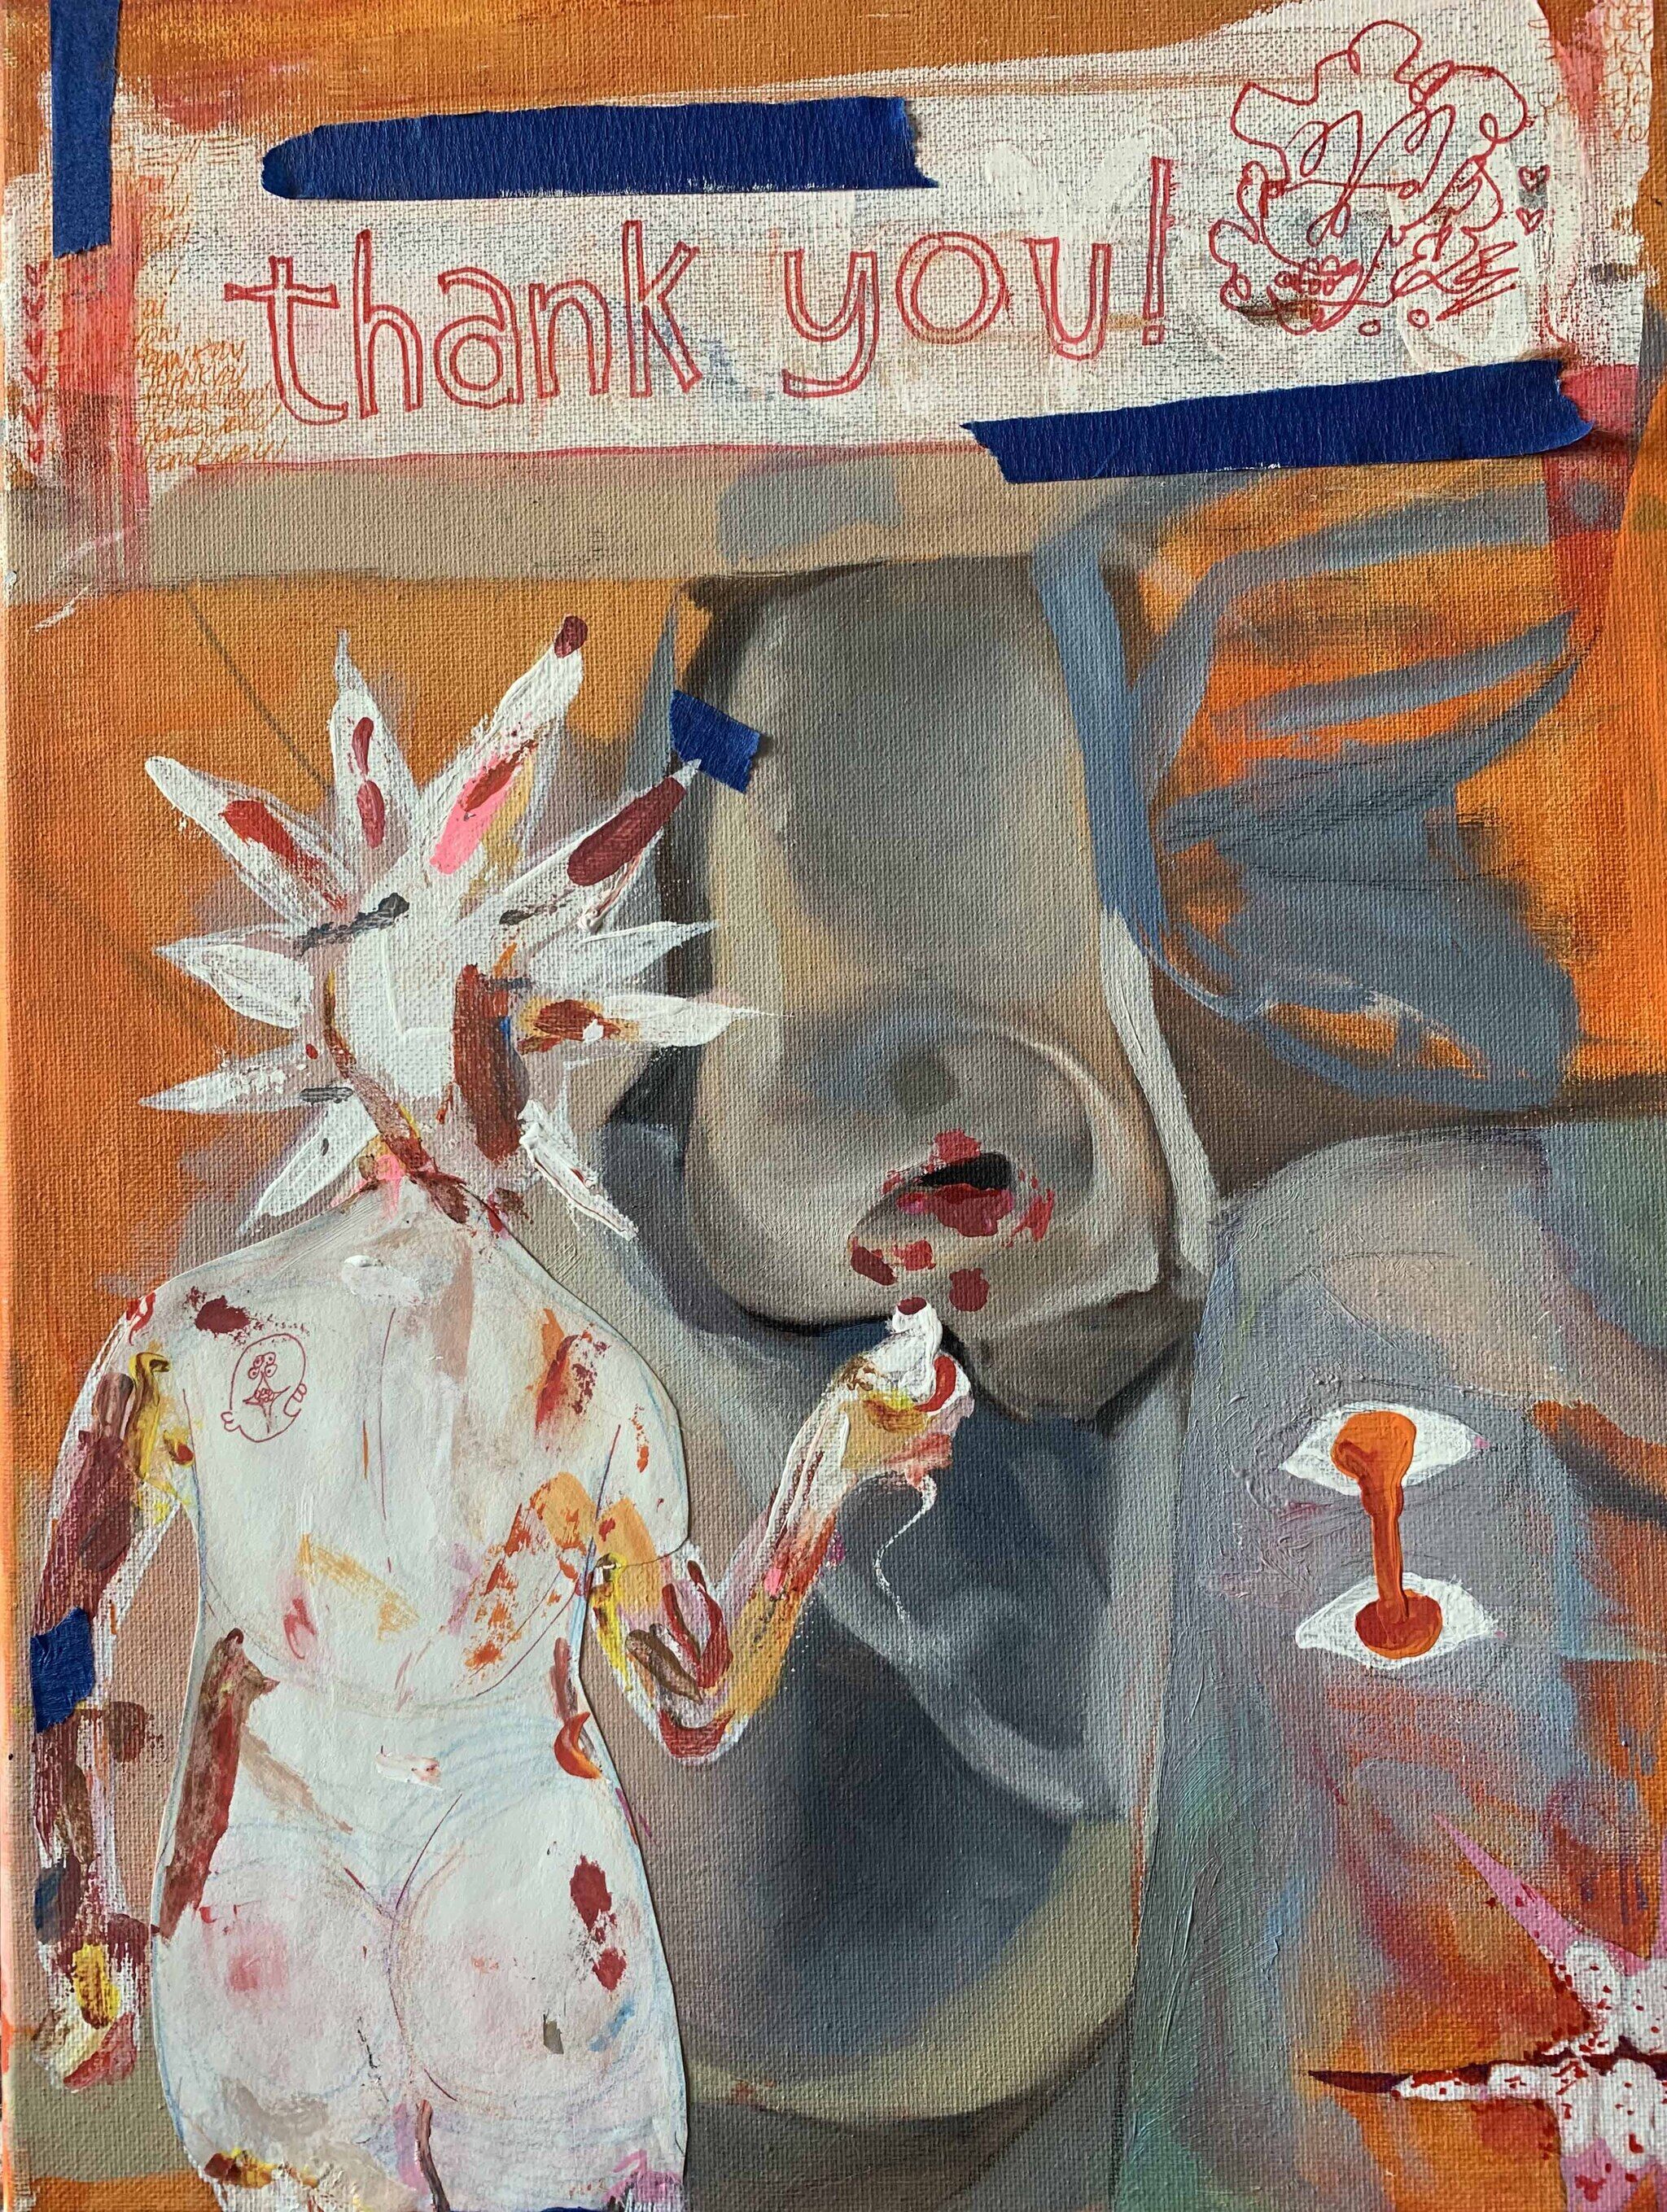 A painting of an orange abstract background with a white figure who vaguely resembles the Statue of Liberty with a taped sign on top that says "thank you!"